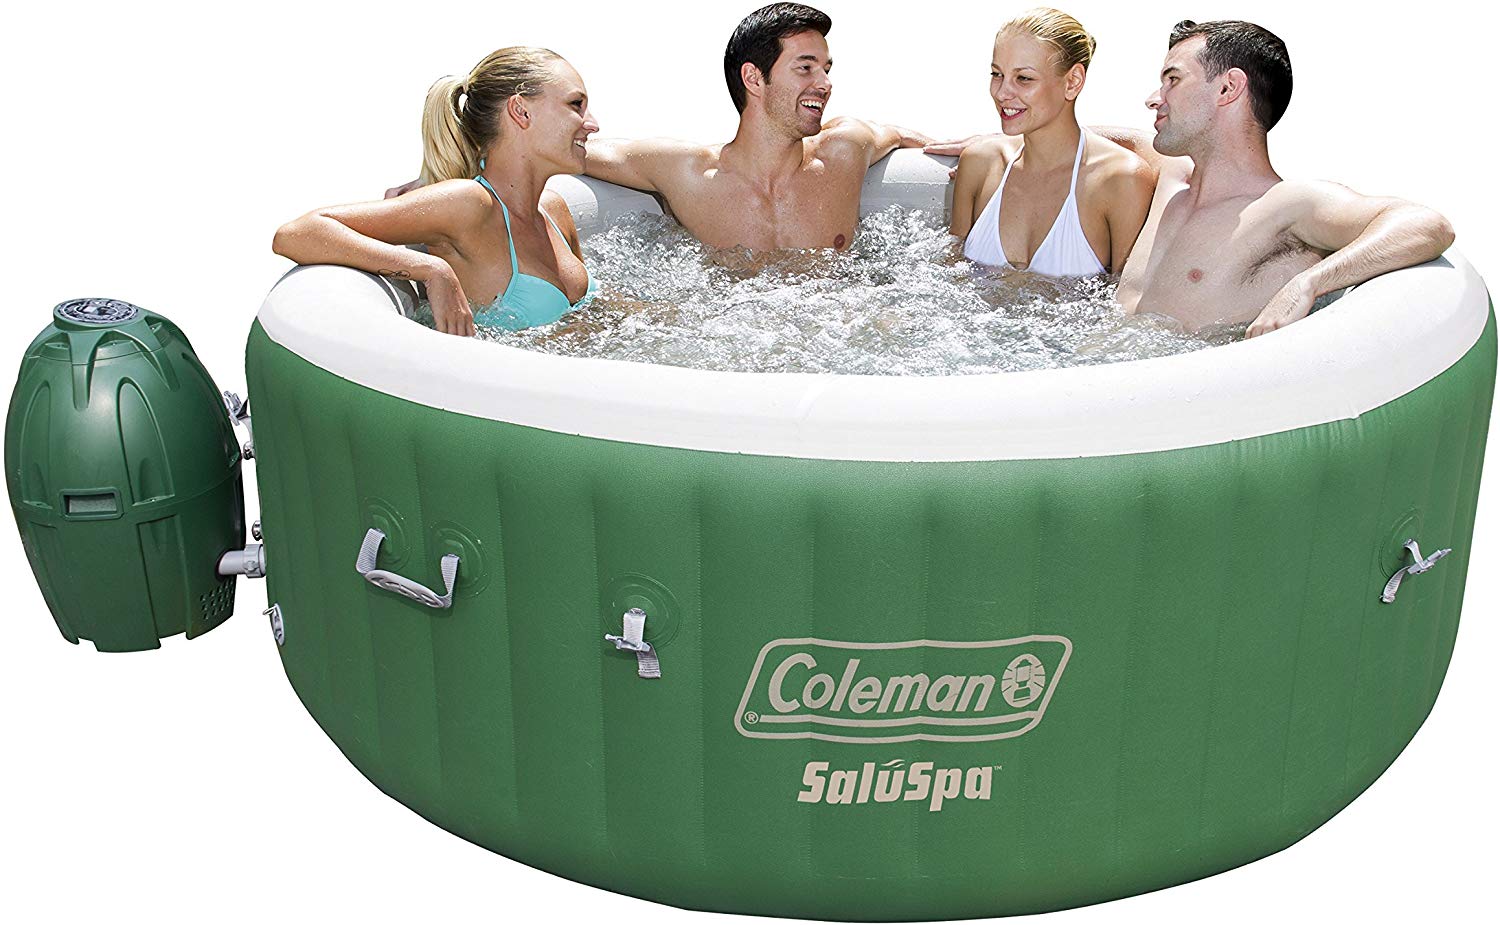 Best Inflatable Hot Tub Review Blow Up Portable Hottub Spa 2021